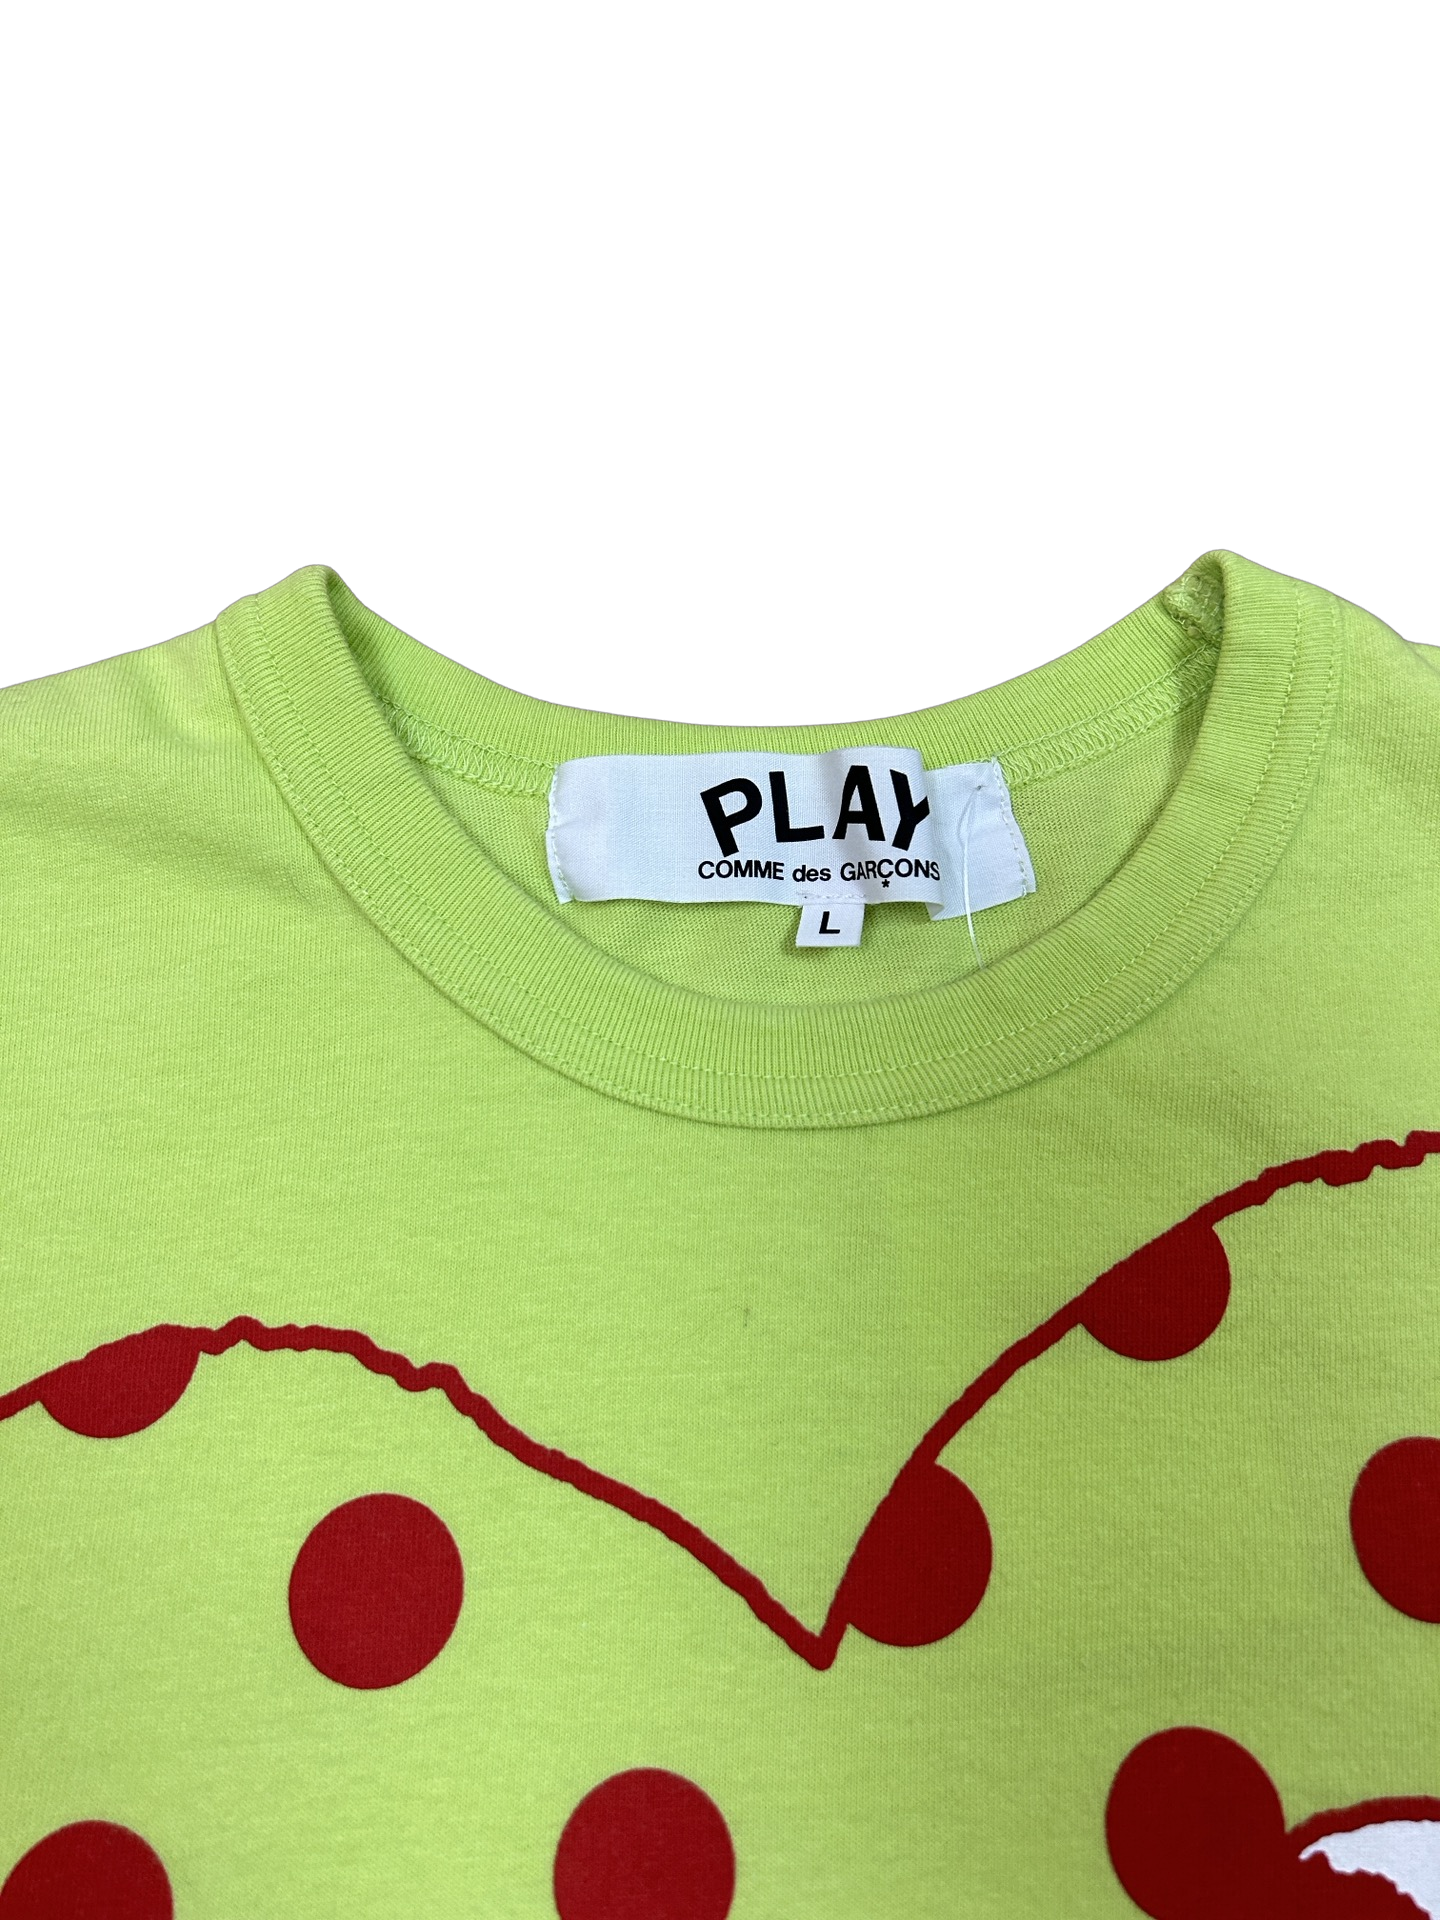 Comme Play tee